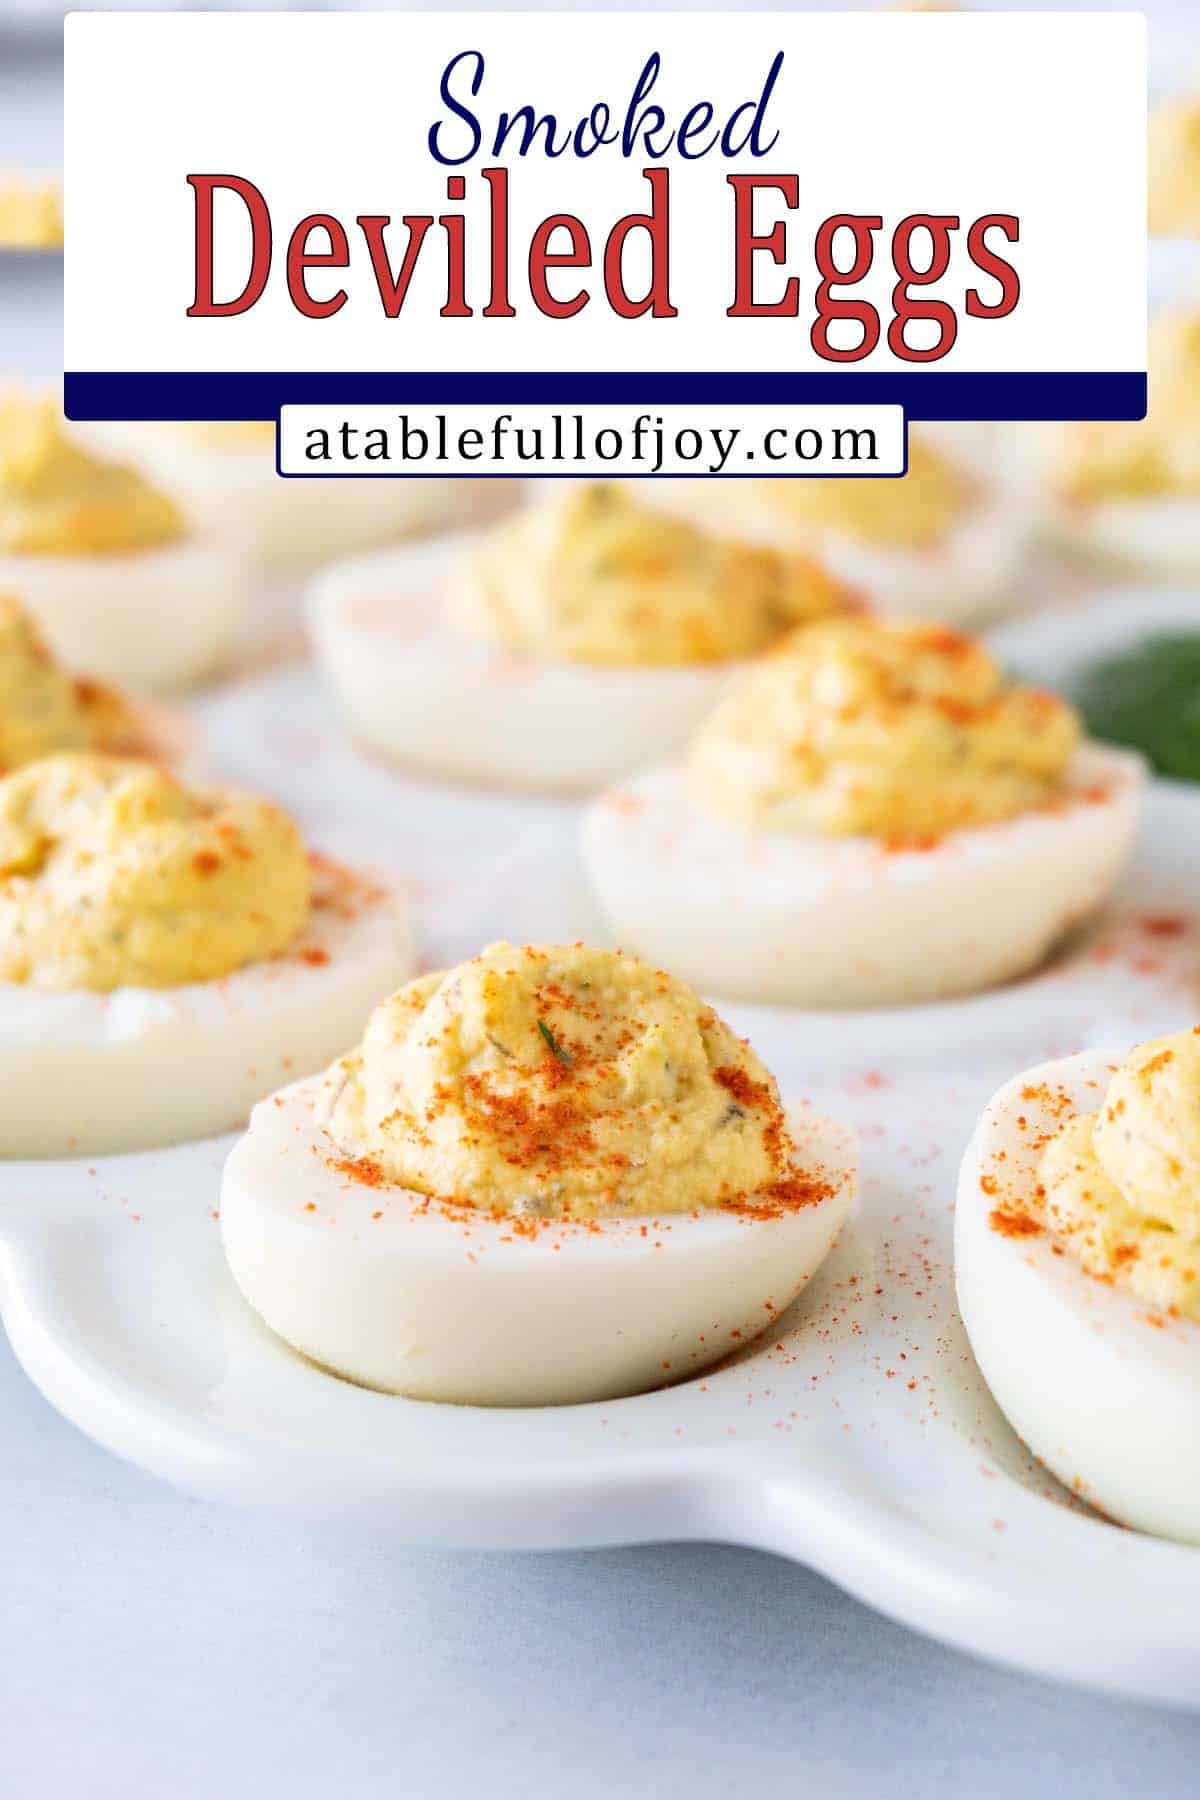 Smoked Deviled Eggs pinterest pins